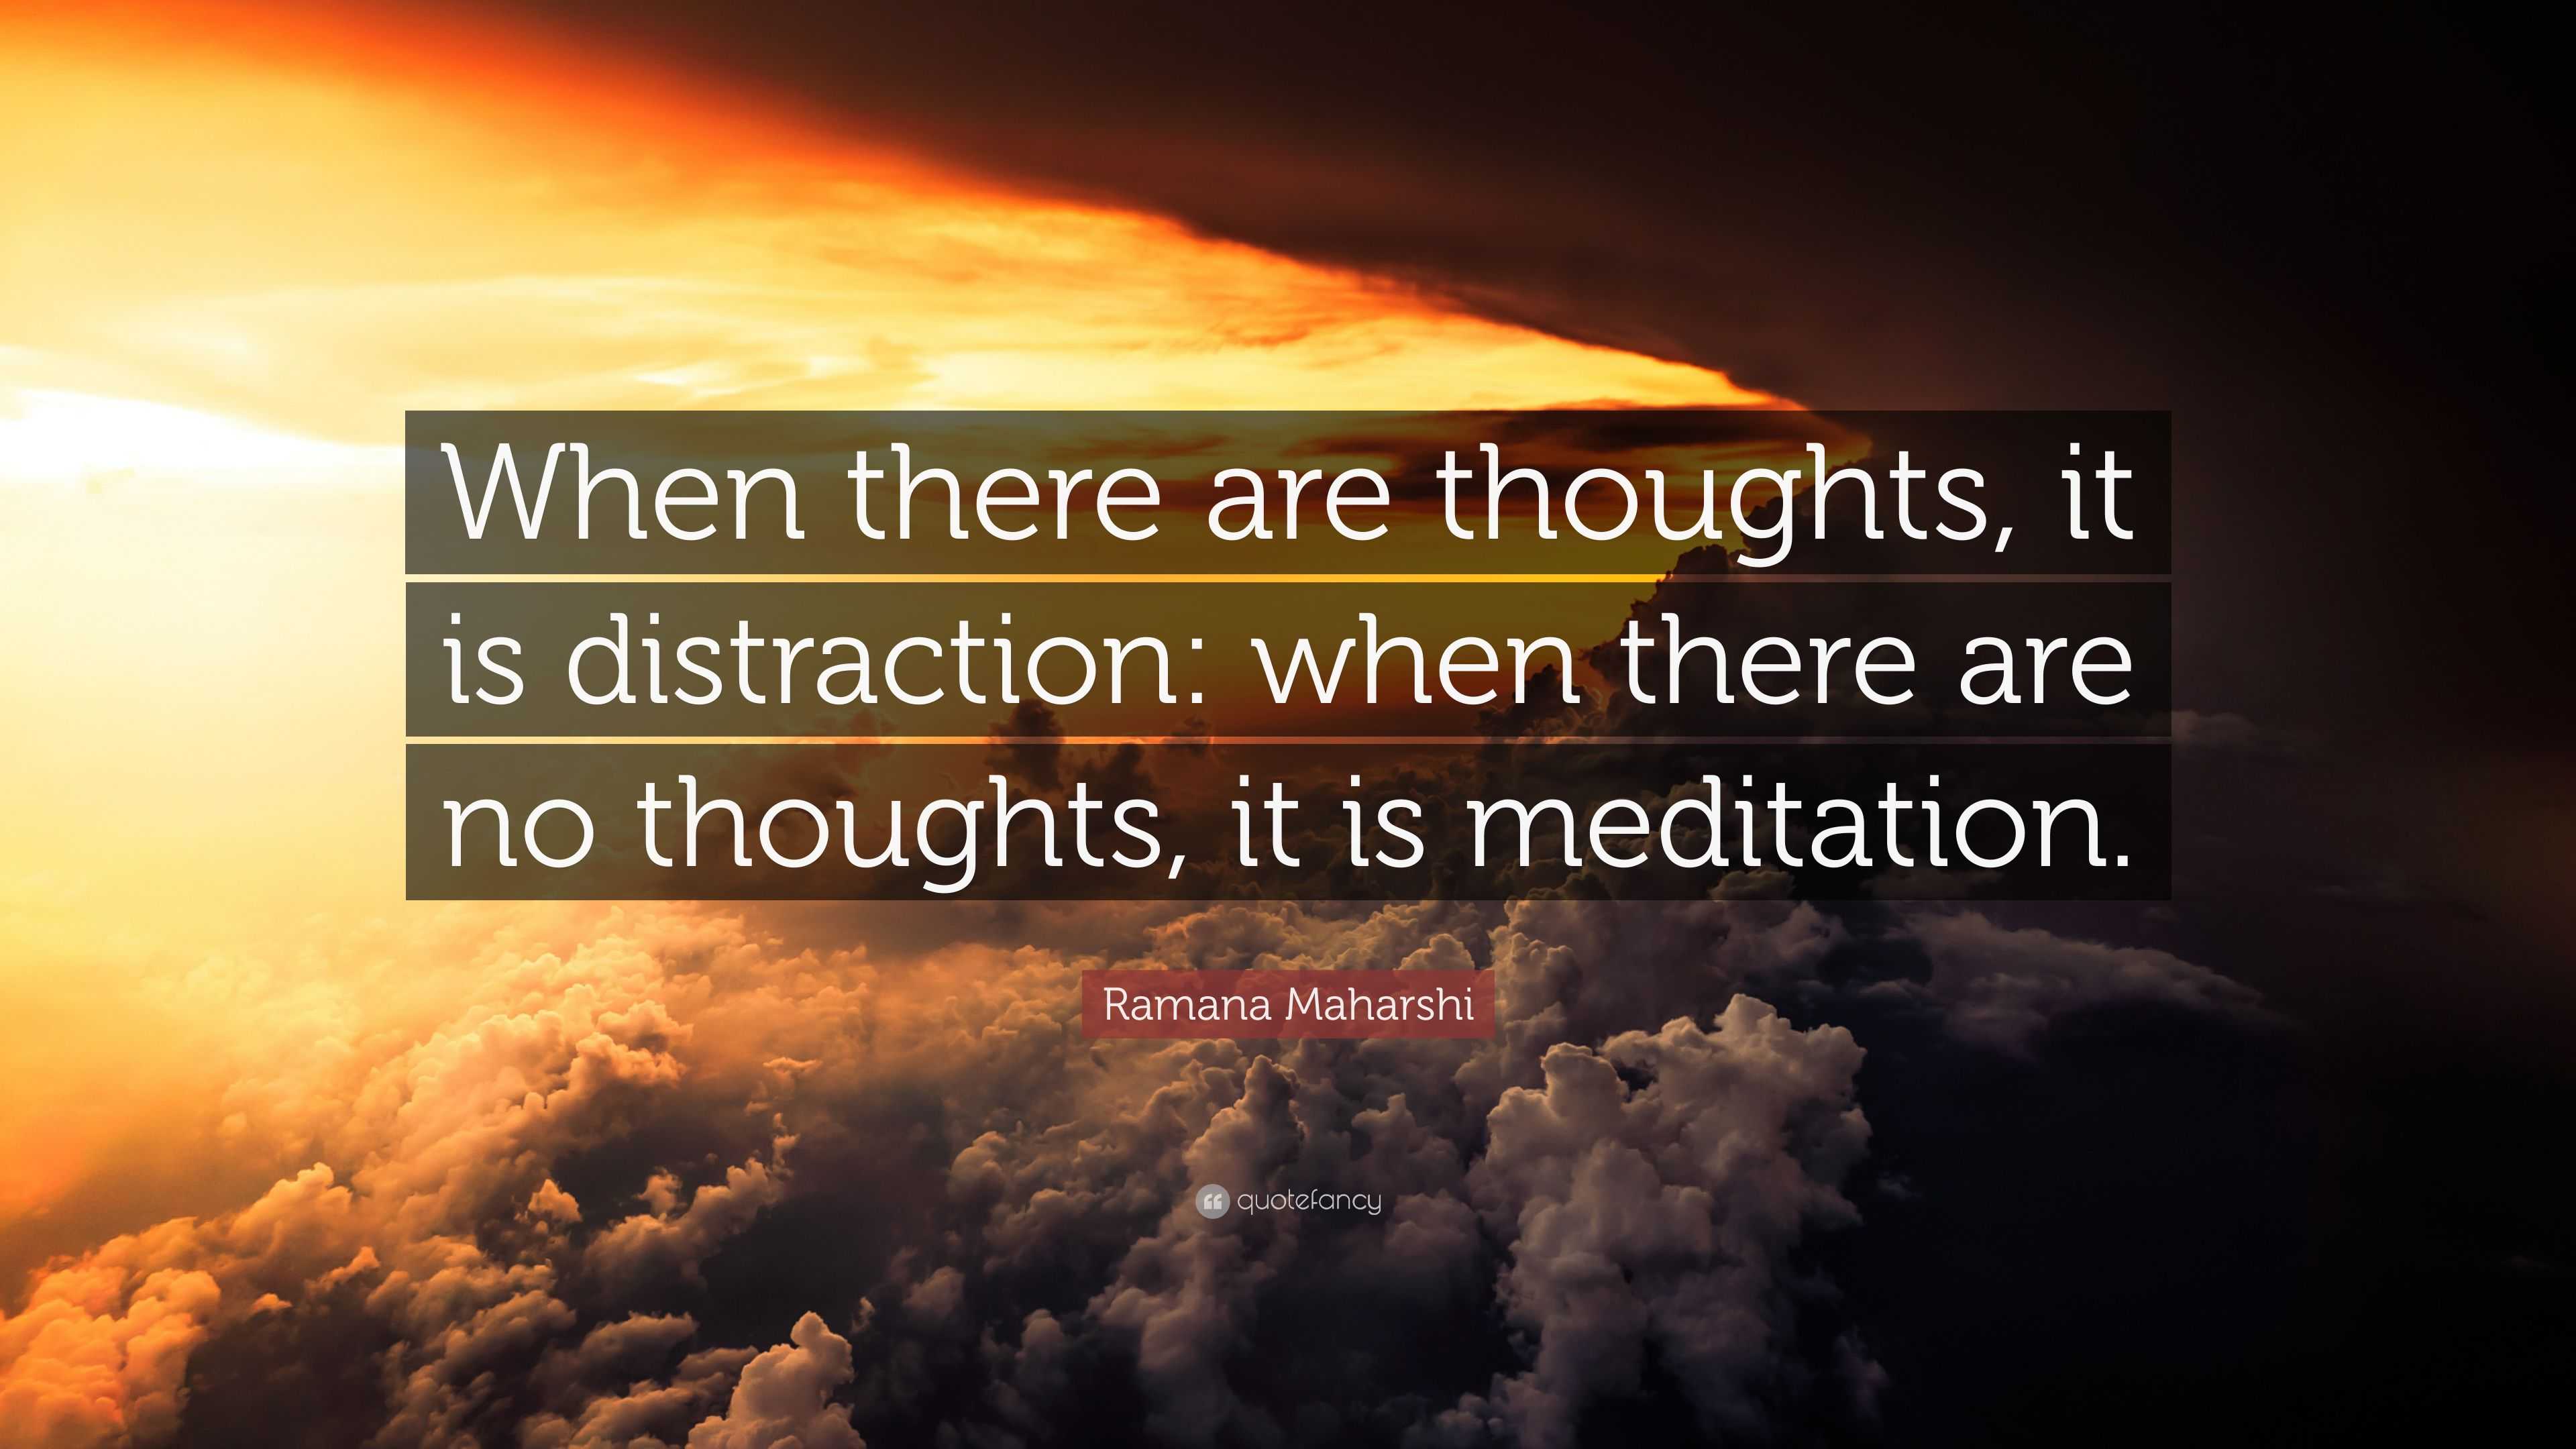 Ramana Maharshi Quote: “When there are thoughts, it is distraction ...